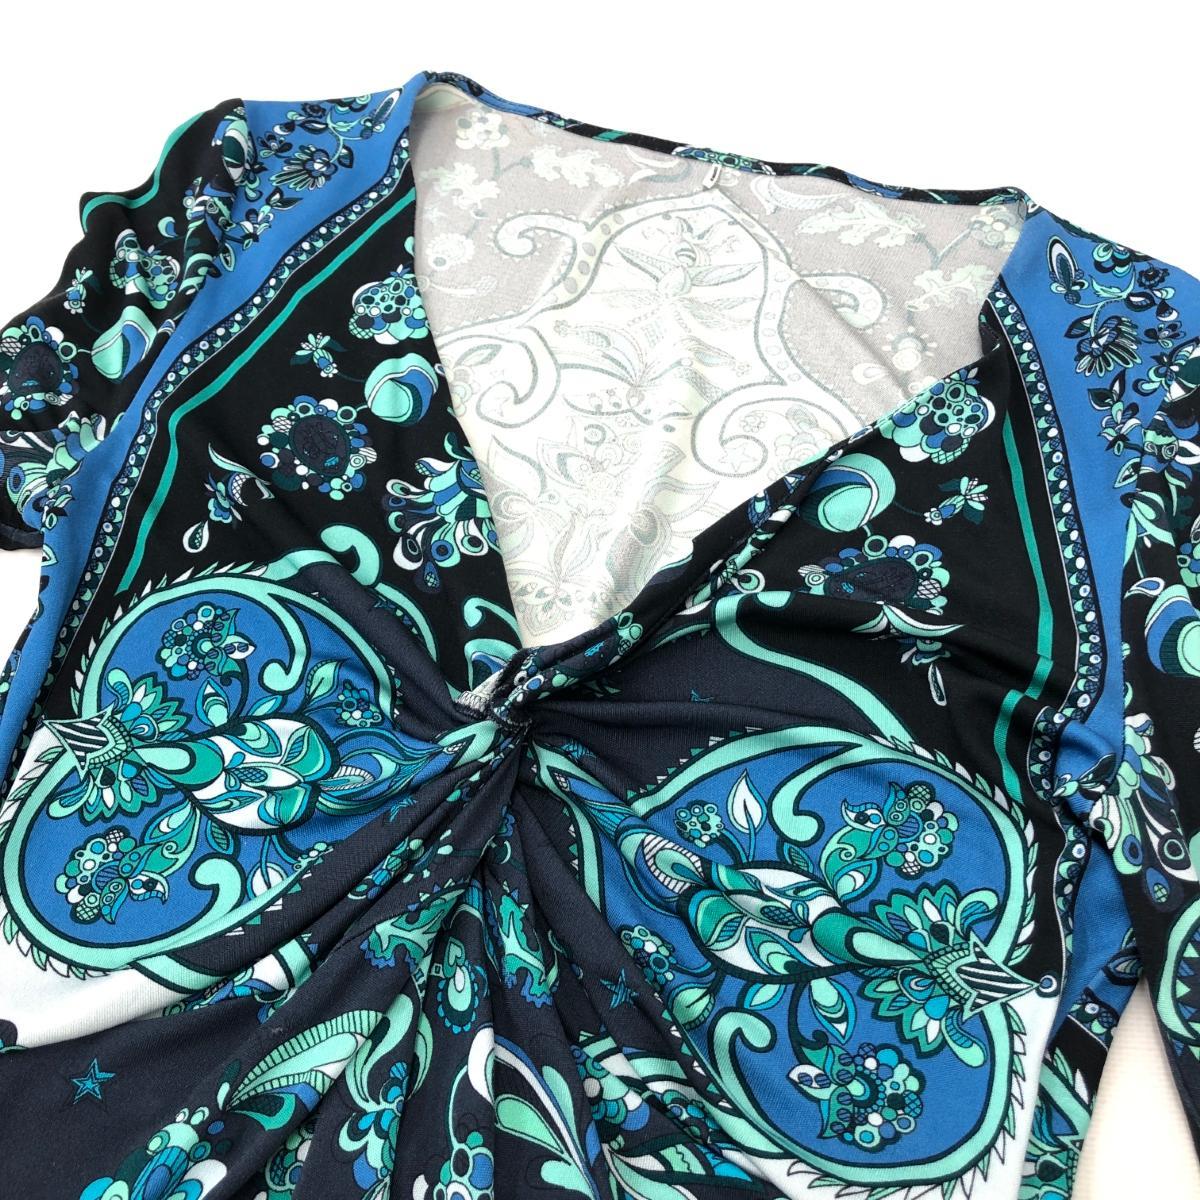 *EMILIO PUCCI Emilio Pucci silk One-piece size 36* blue lady's Italy made . minute sleeve 